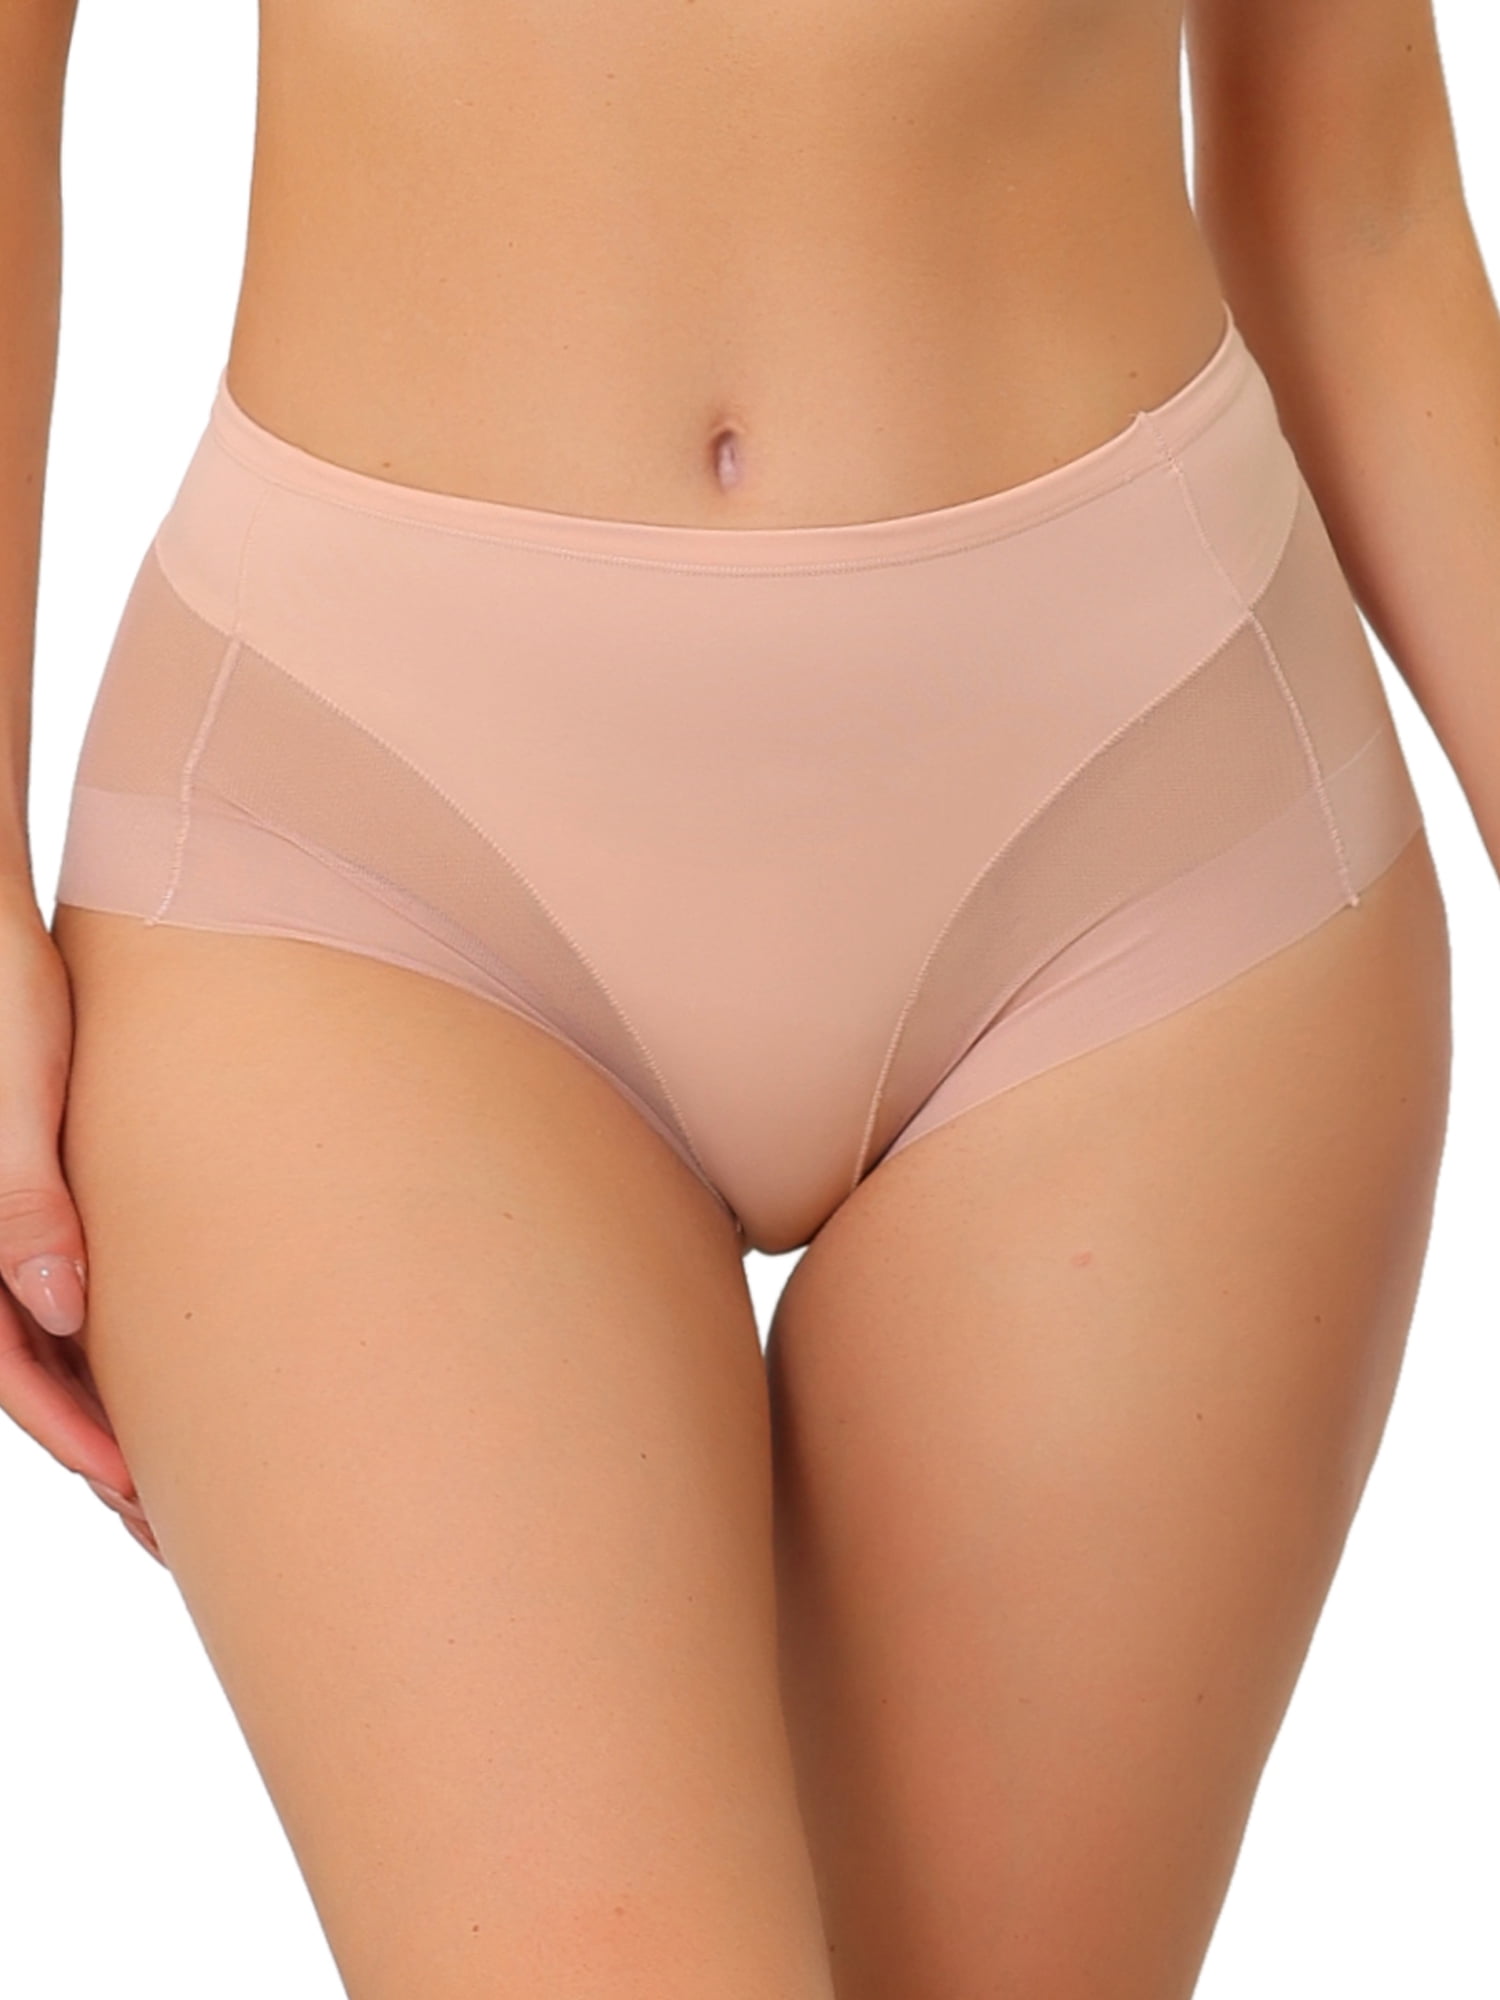 Women Seamless Panties Laser Cutting High Waiste Underwear Stretchy  Invisible Underpants Naked Feeling Traceless Briefs S M L XL